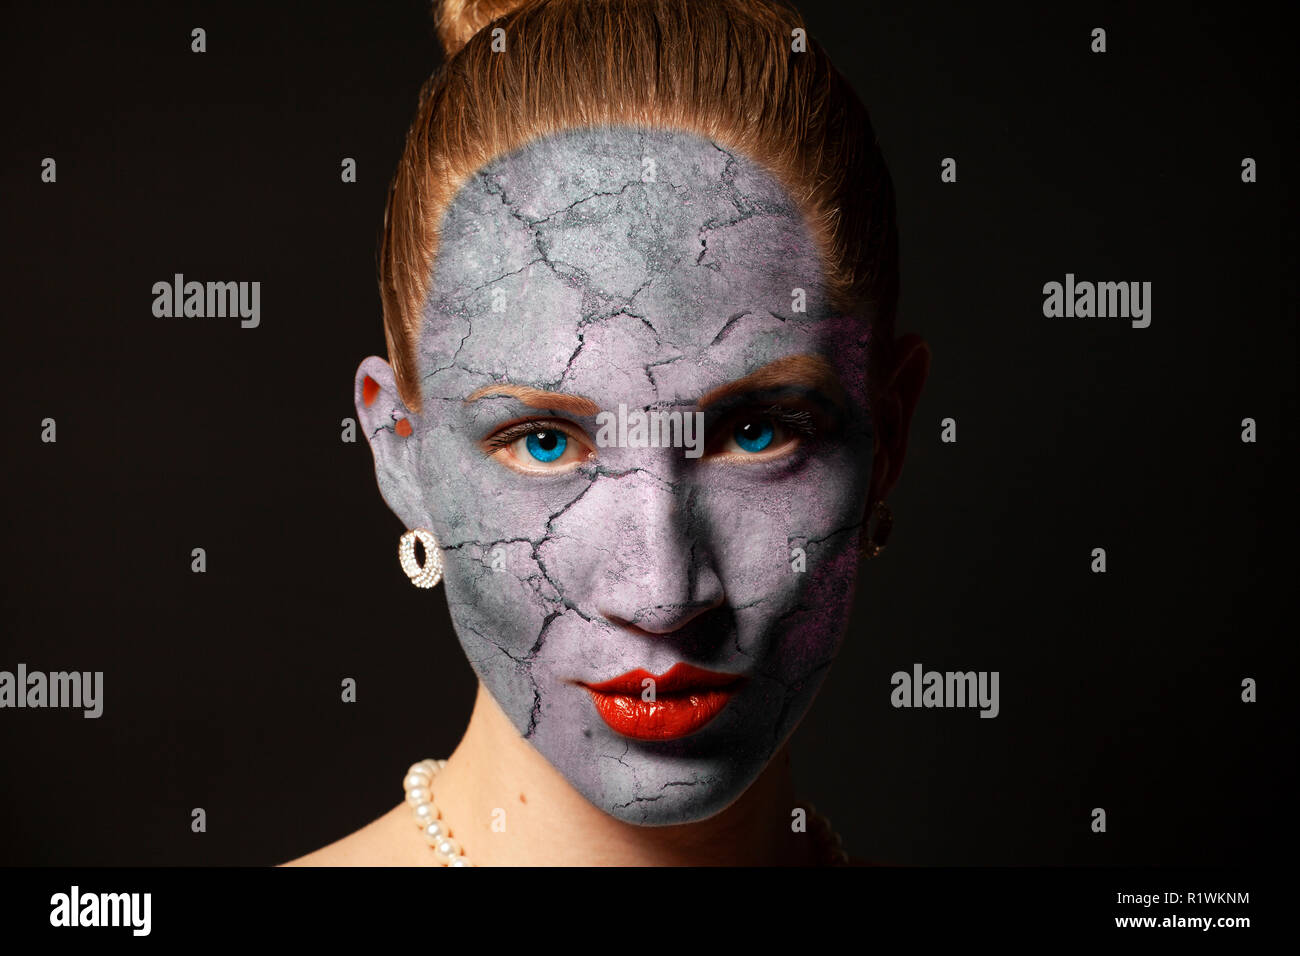 Cracked Surface On Woman Facedry Skin Concept Stock Photo Alamy